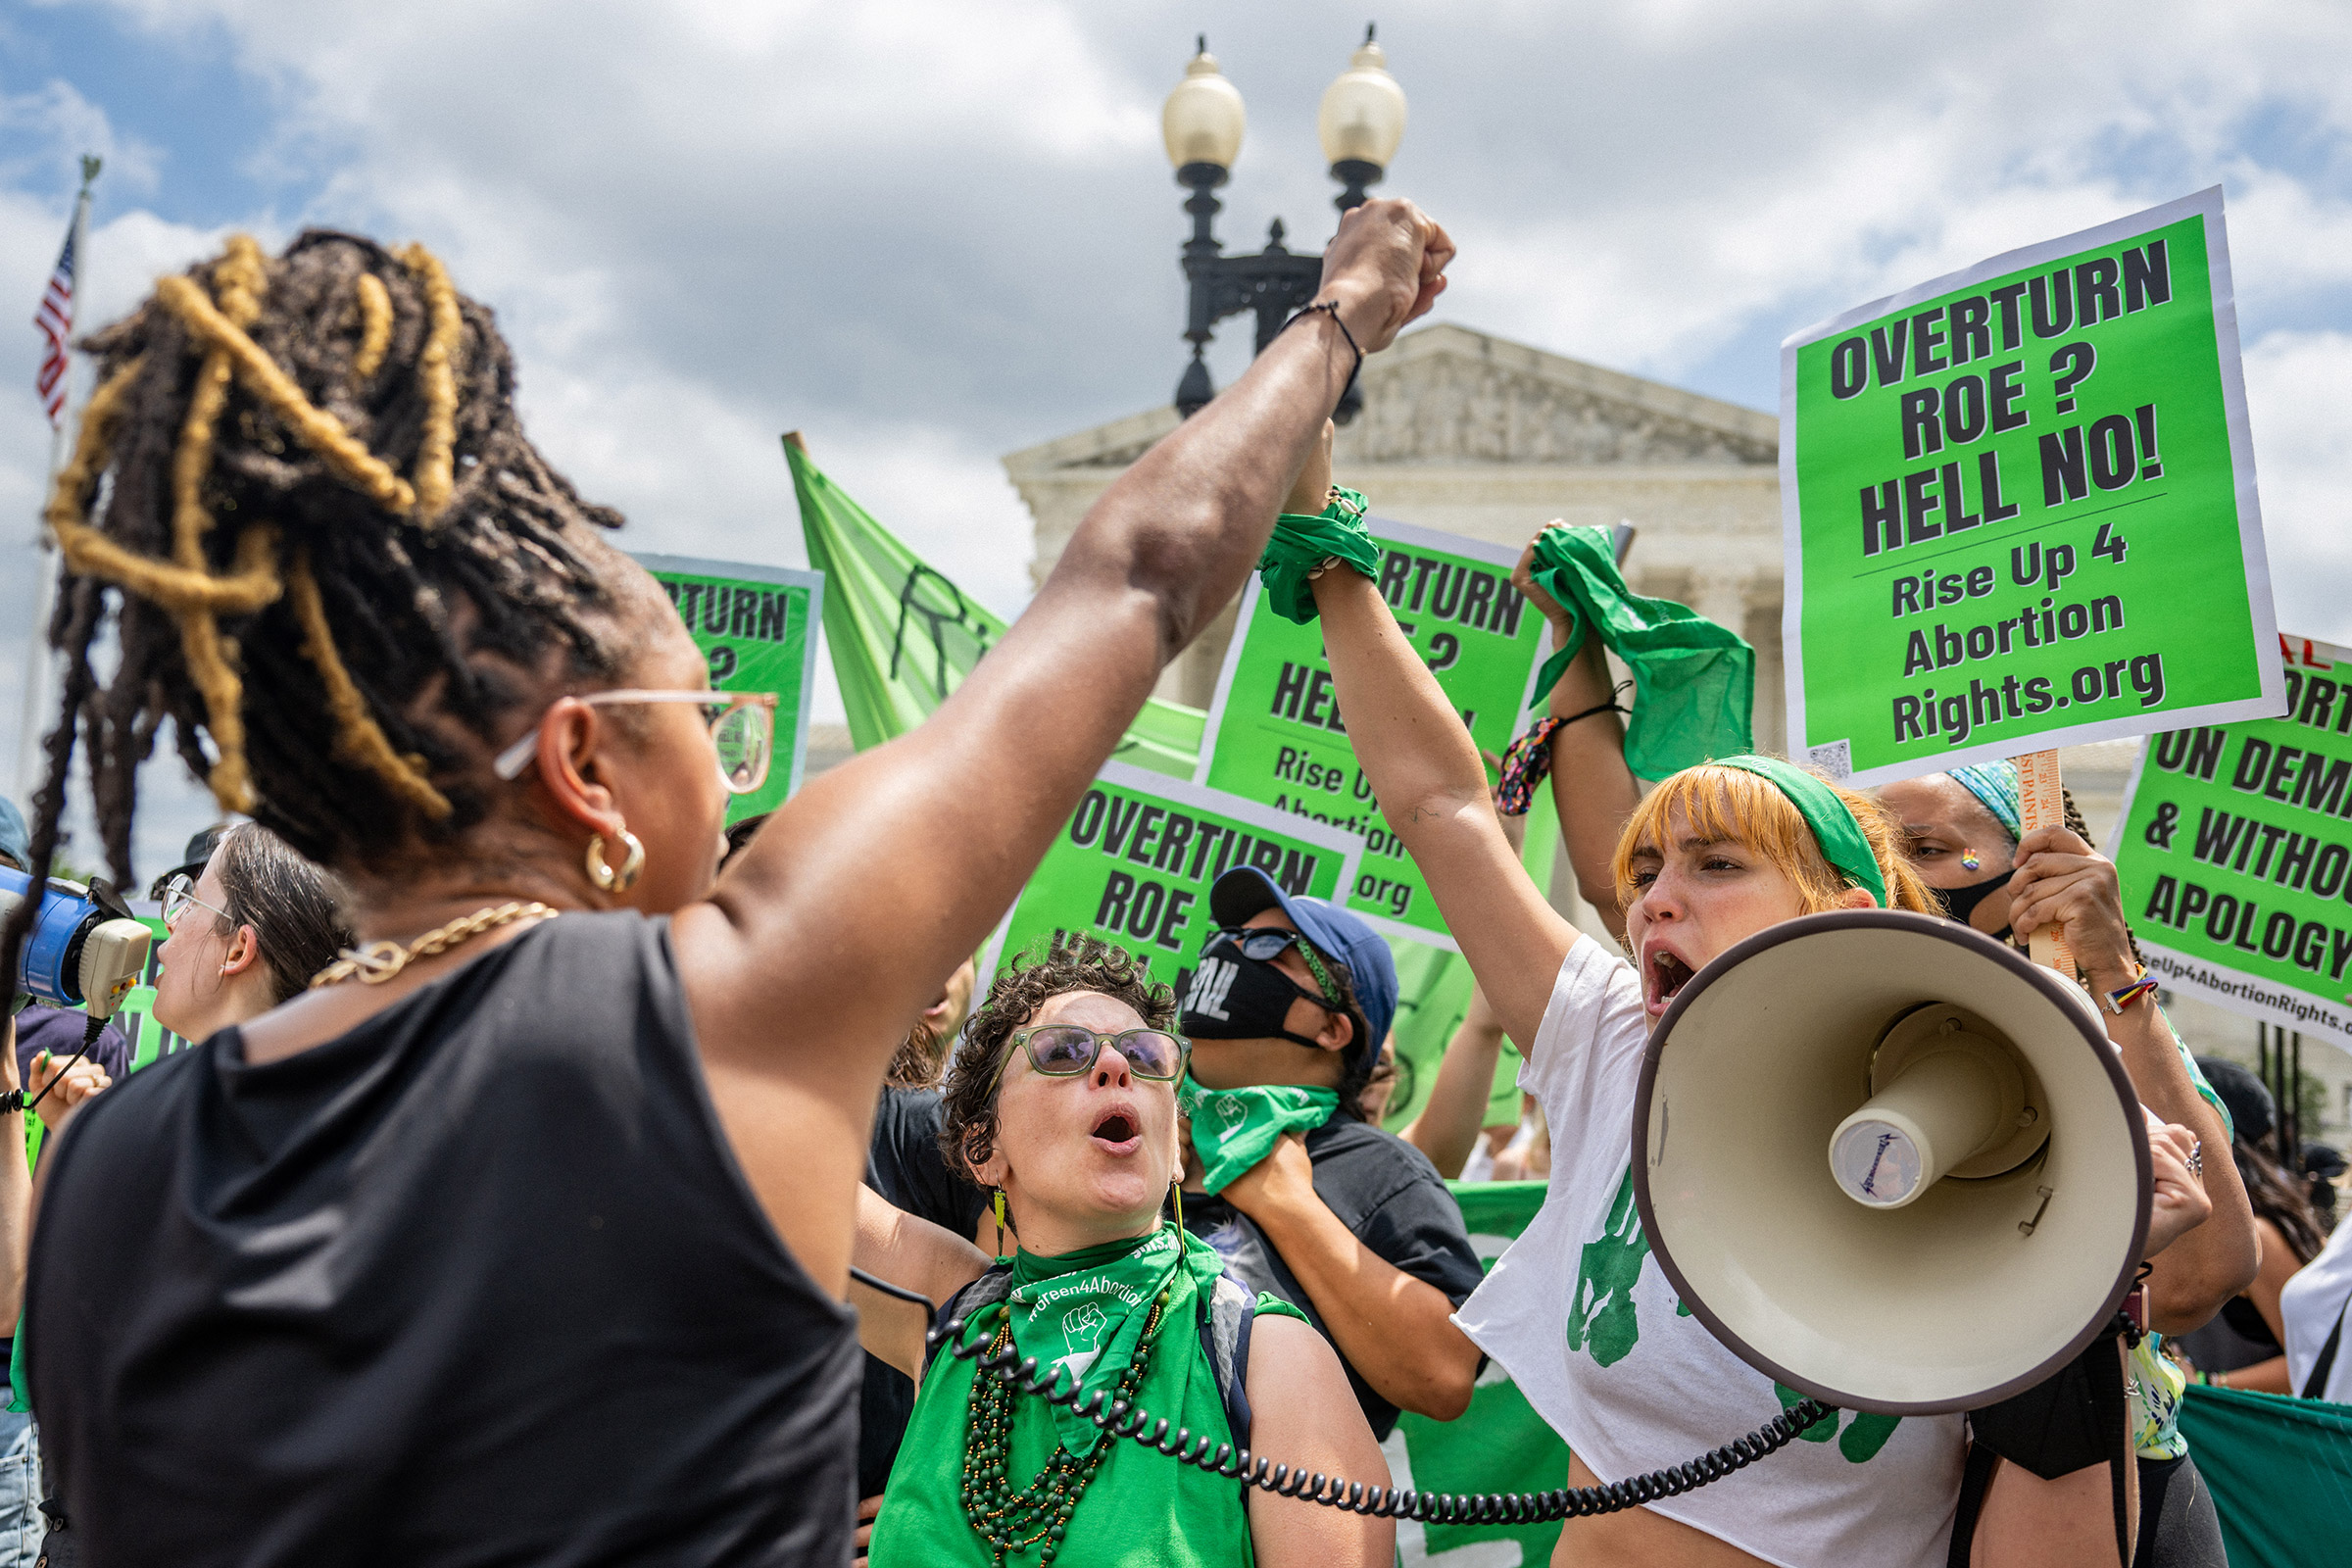 Abortion-rights demonstrator Elizabeth White leads a chant in response to the <em>Dobbs v. Jackson Women’s Health Organization</em> ruling in front of the Supreme Court in Washington, D.C., on June 24, 2022 (Brandon Bell—Getty Images)